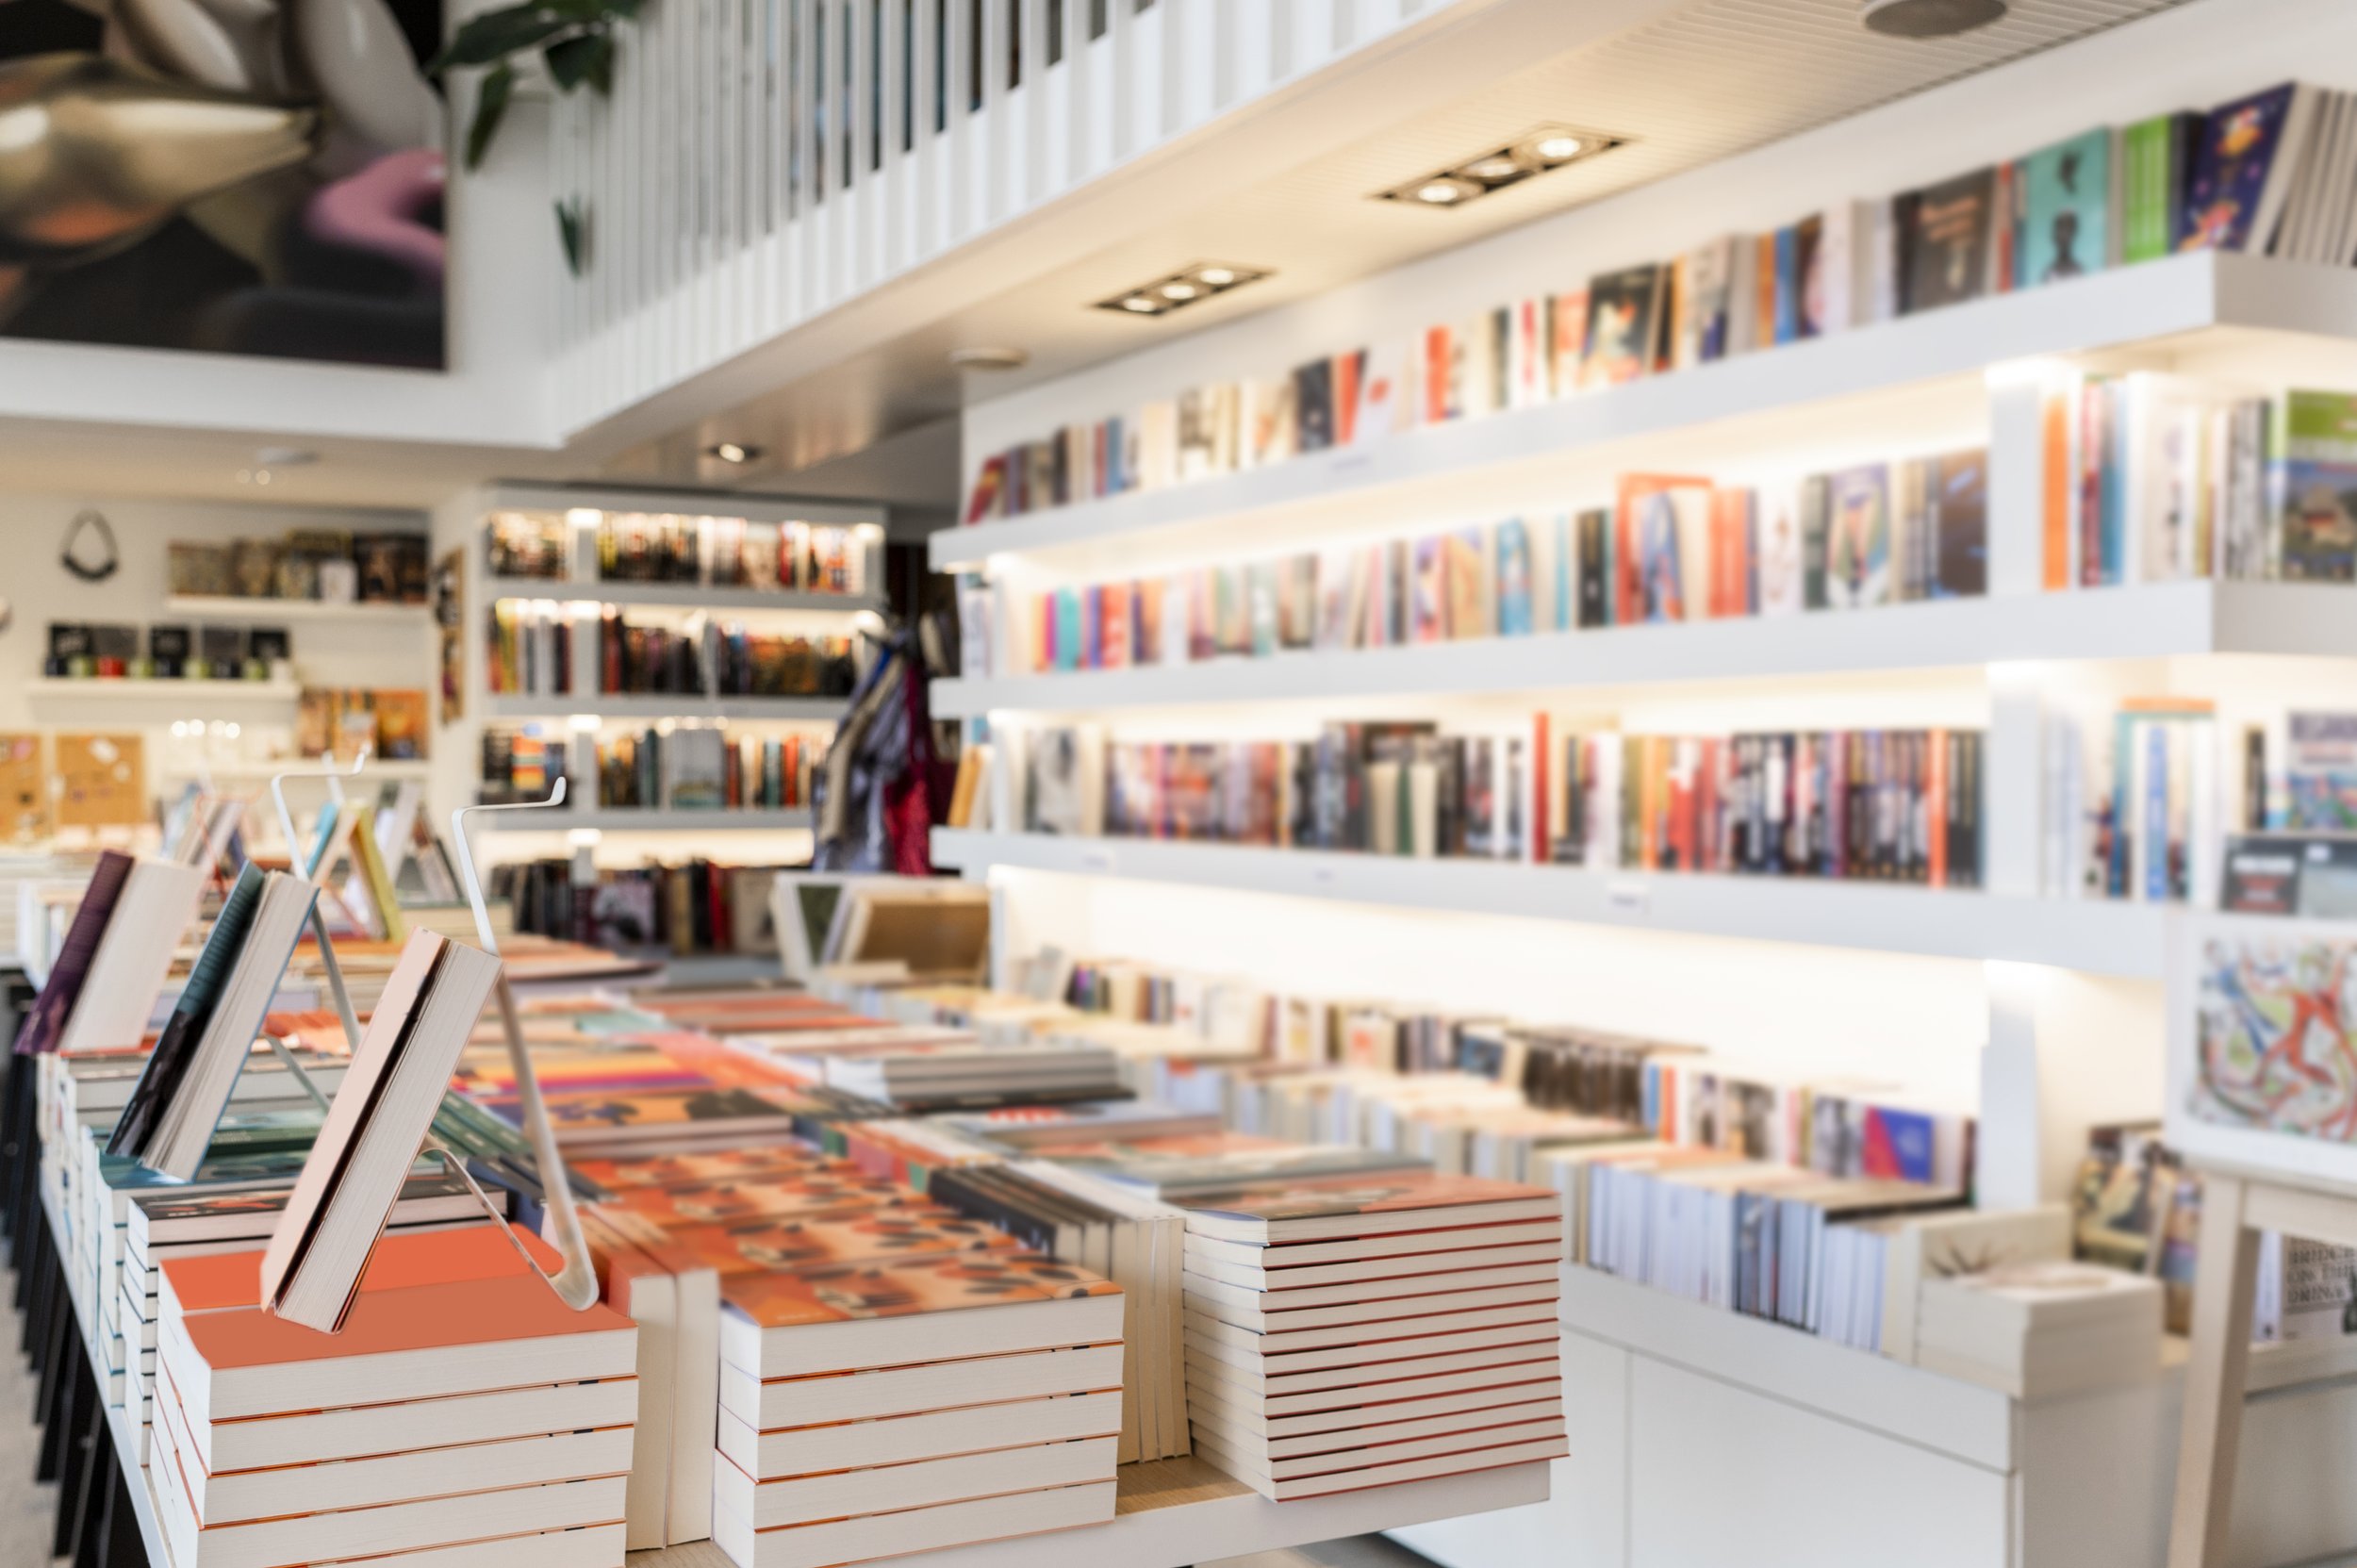 Ingram's Guide to Opening a Bookstore